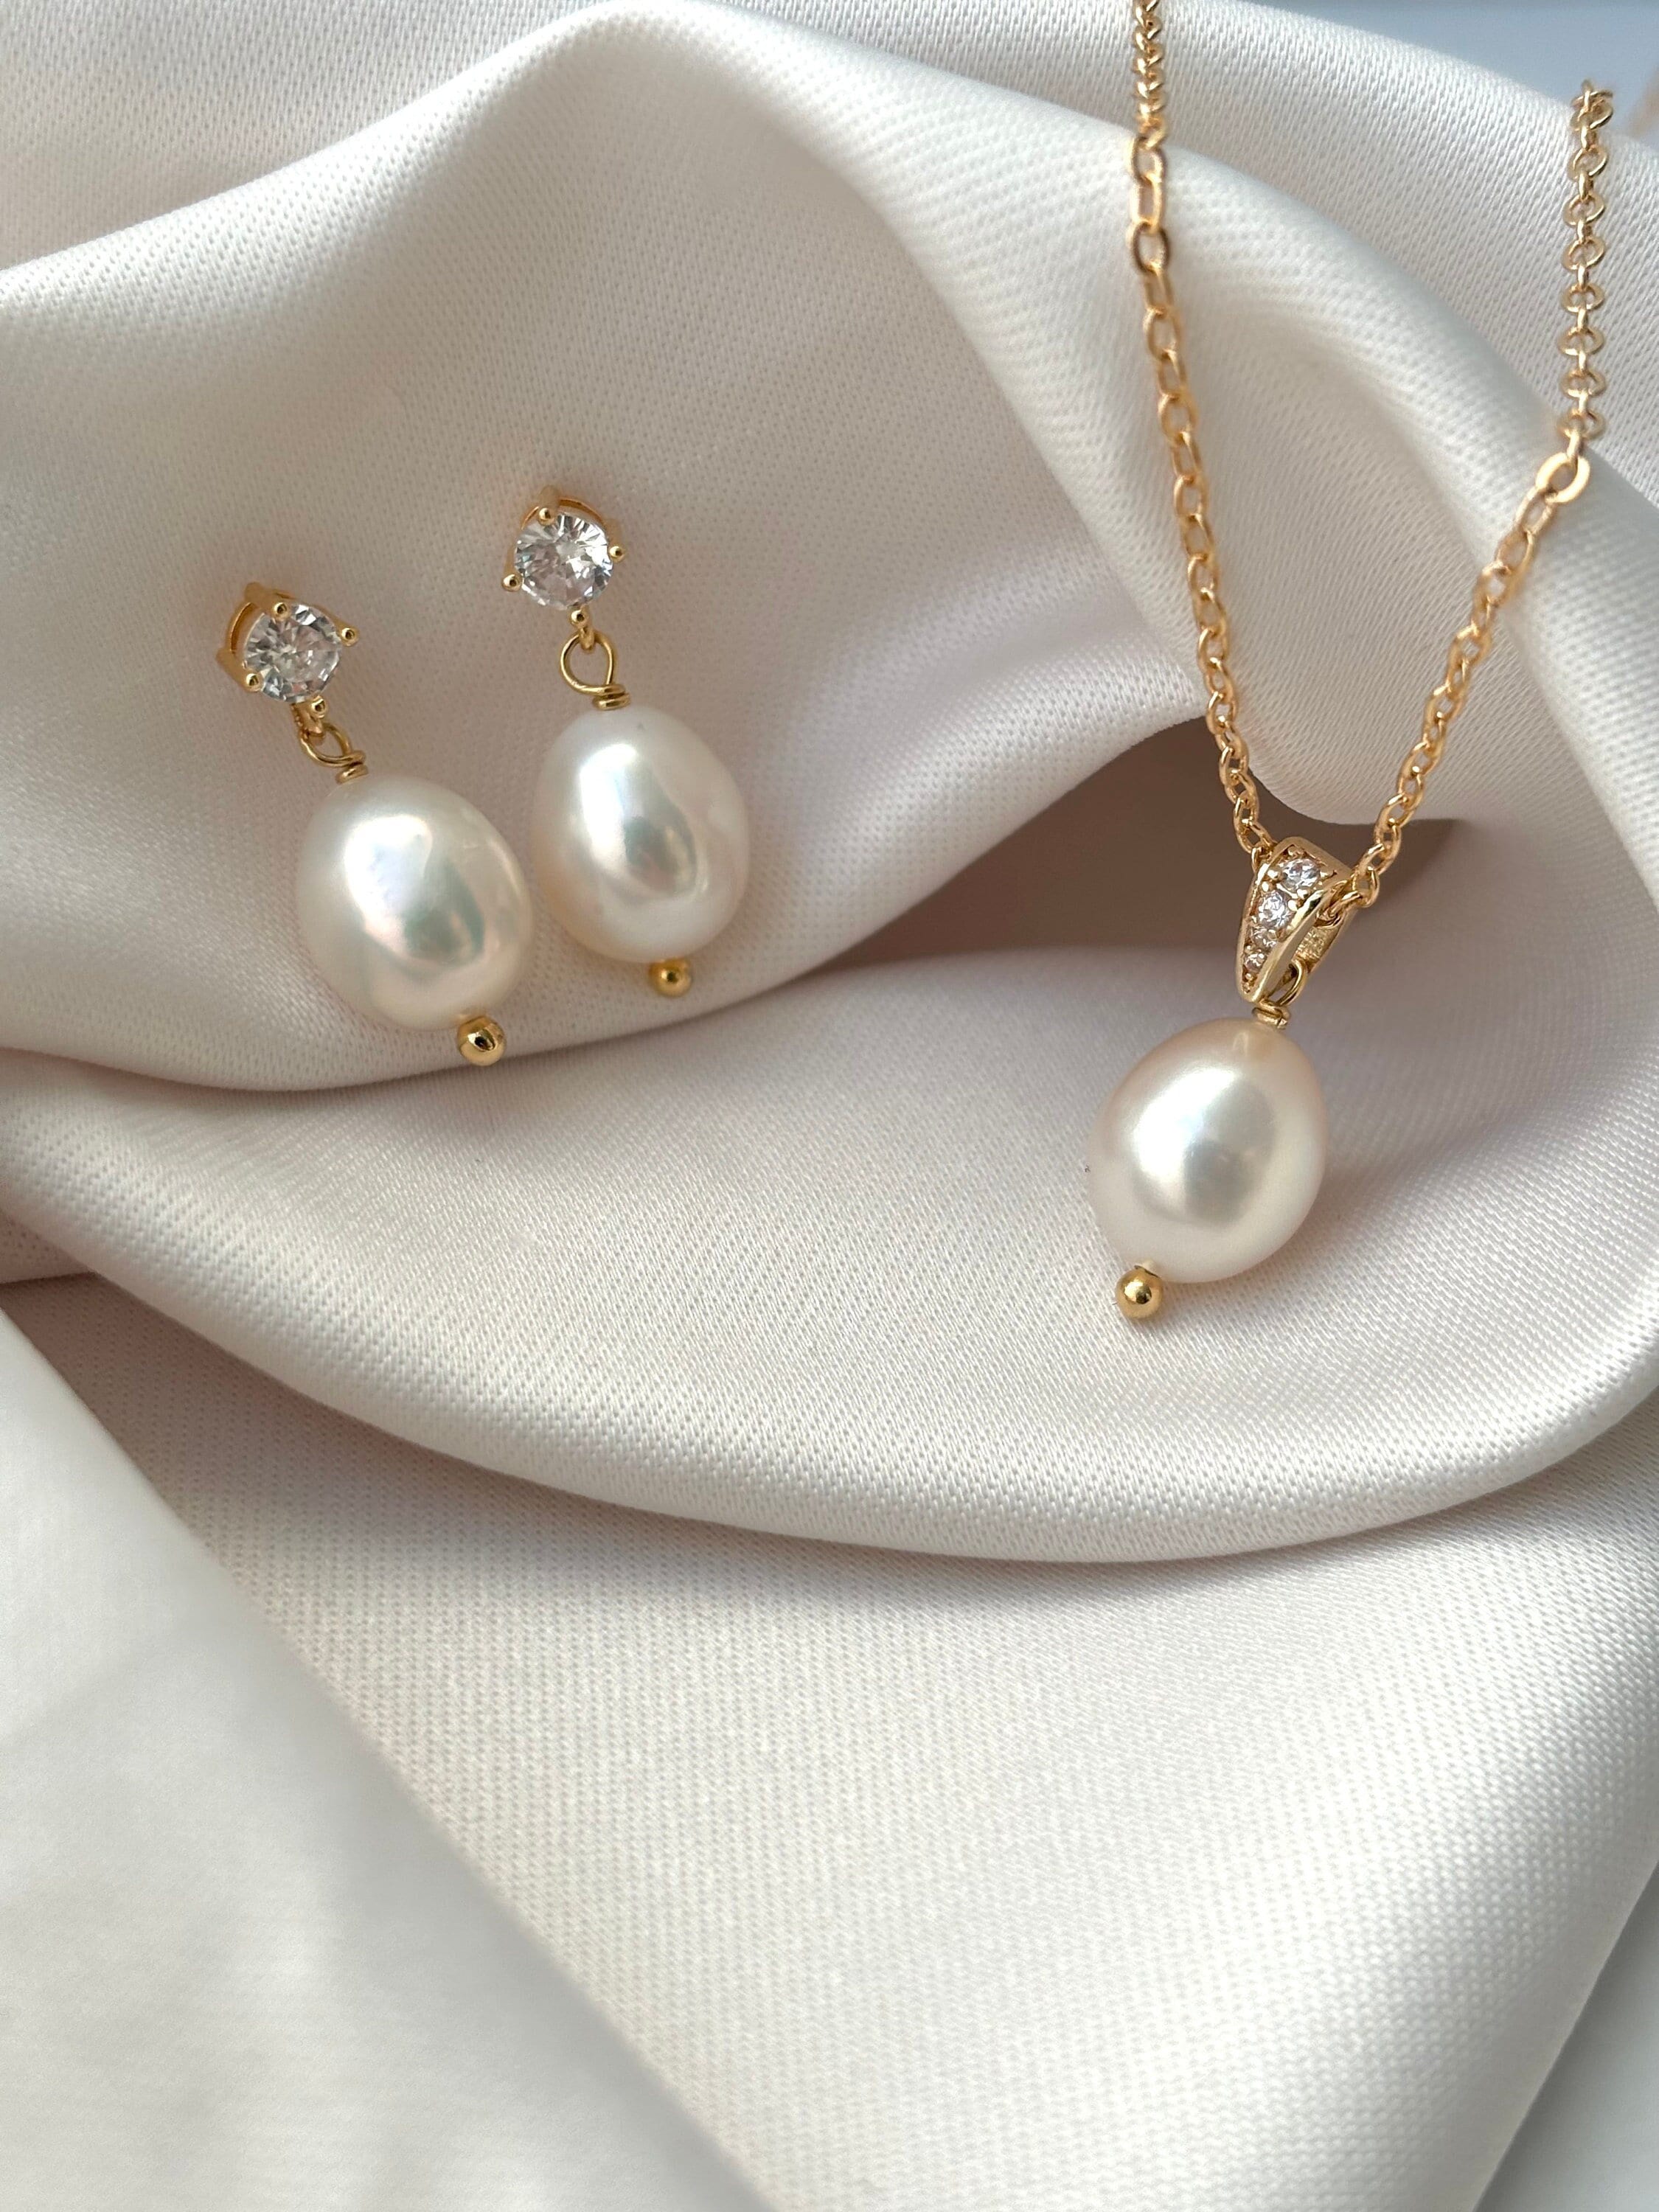 Pearl Bridal Jewellery Set, Gold Diamond & Pearl Necklace, Dainty Freshwater Necklace With Cable Chain, Wedding